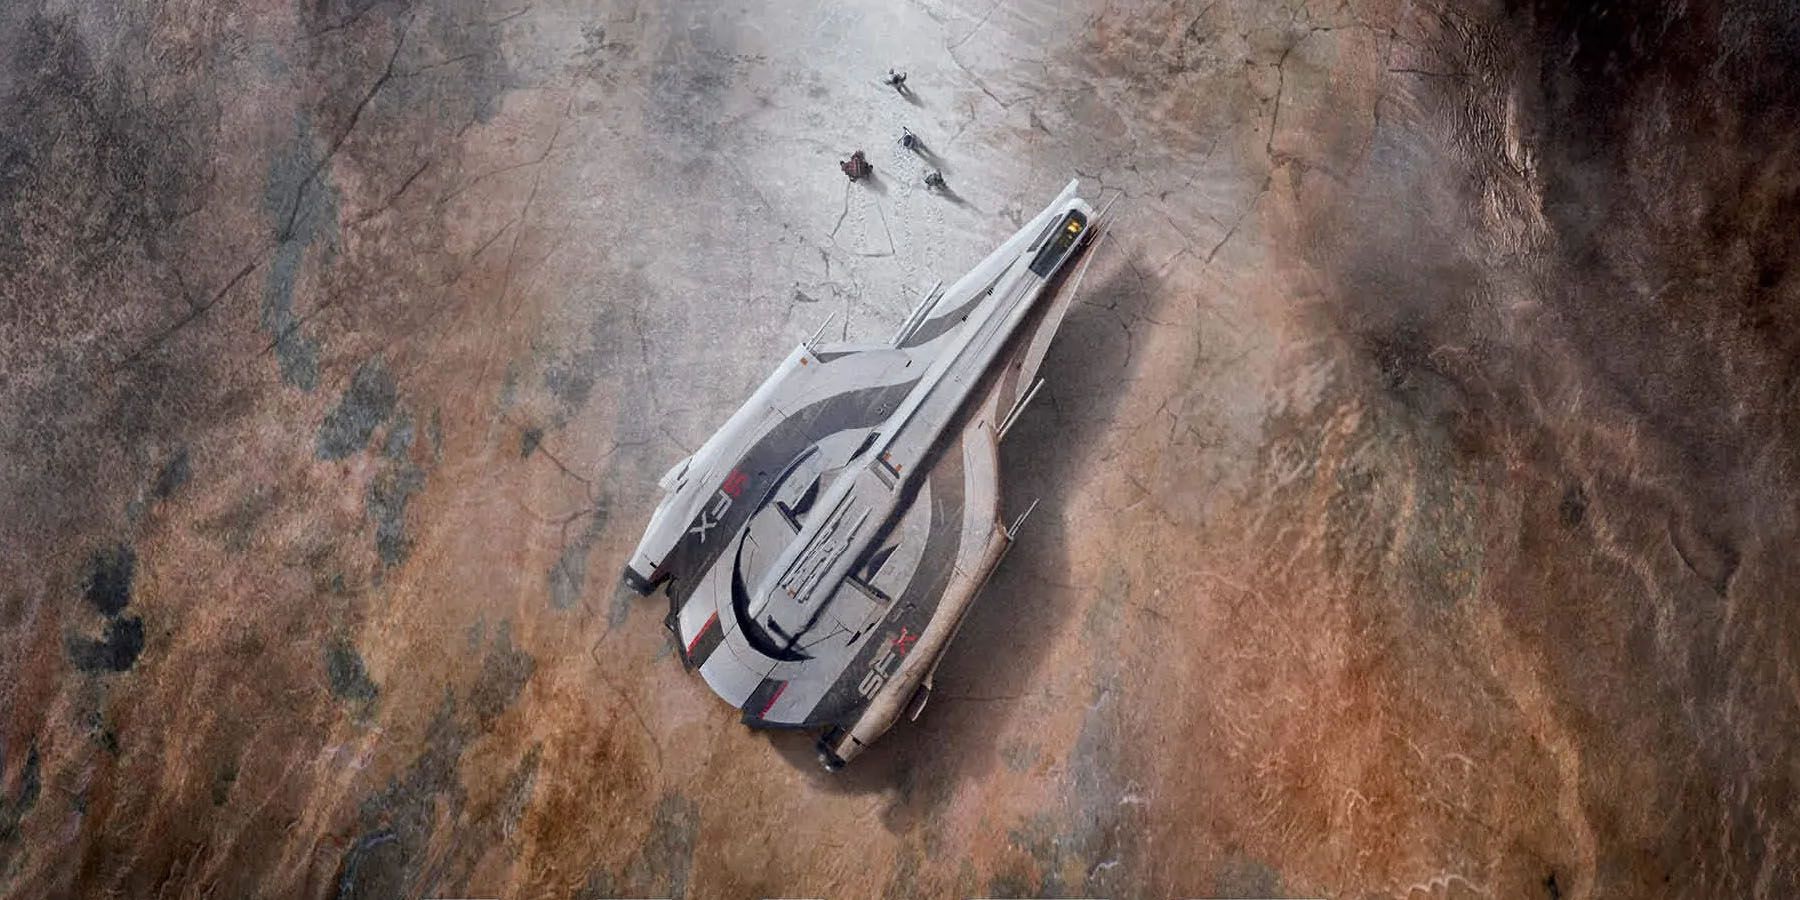 A promtional image of a spaceship from a Mass Effect 5 teaser poster.